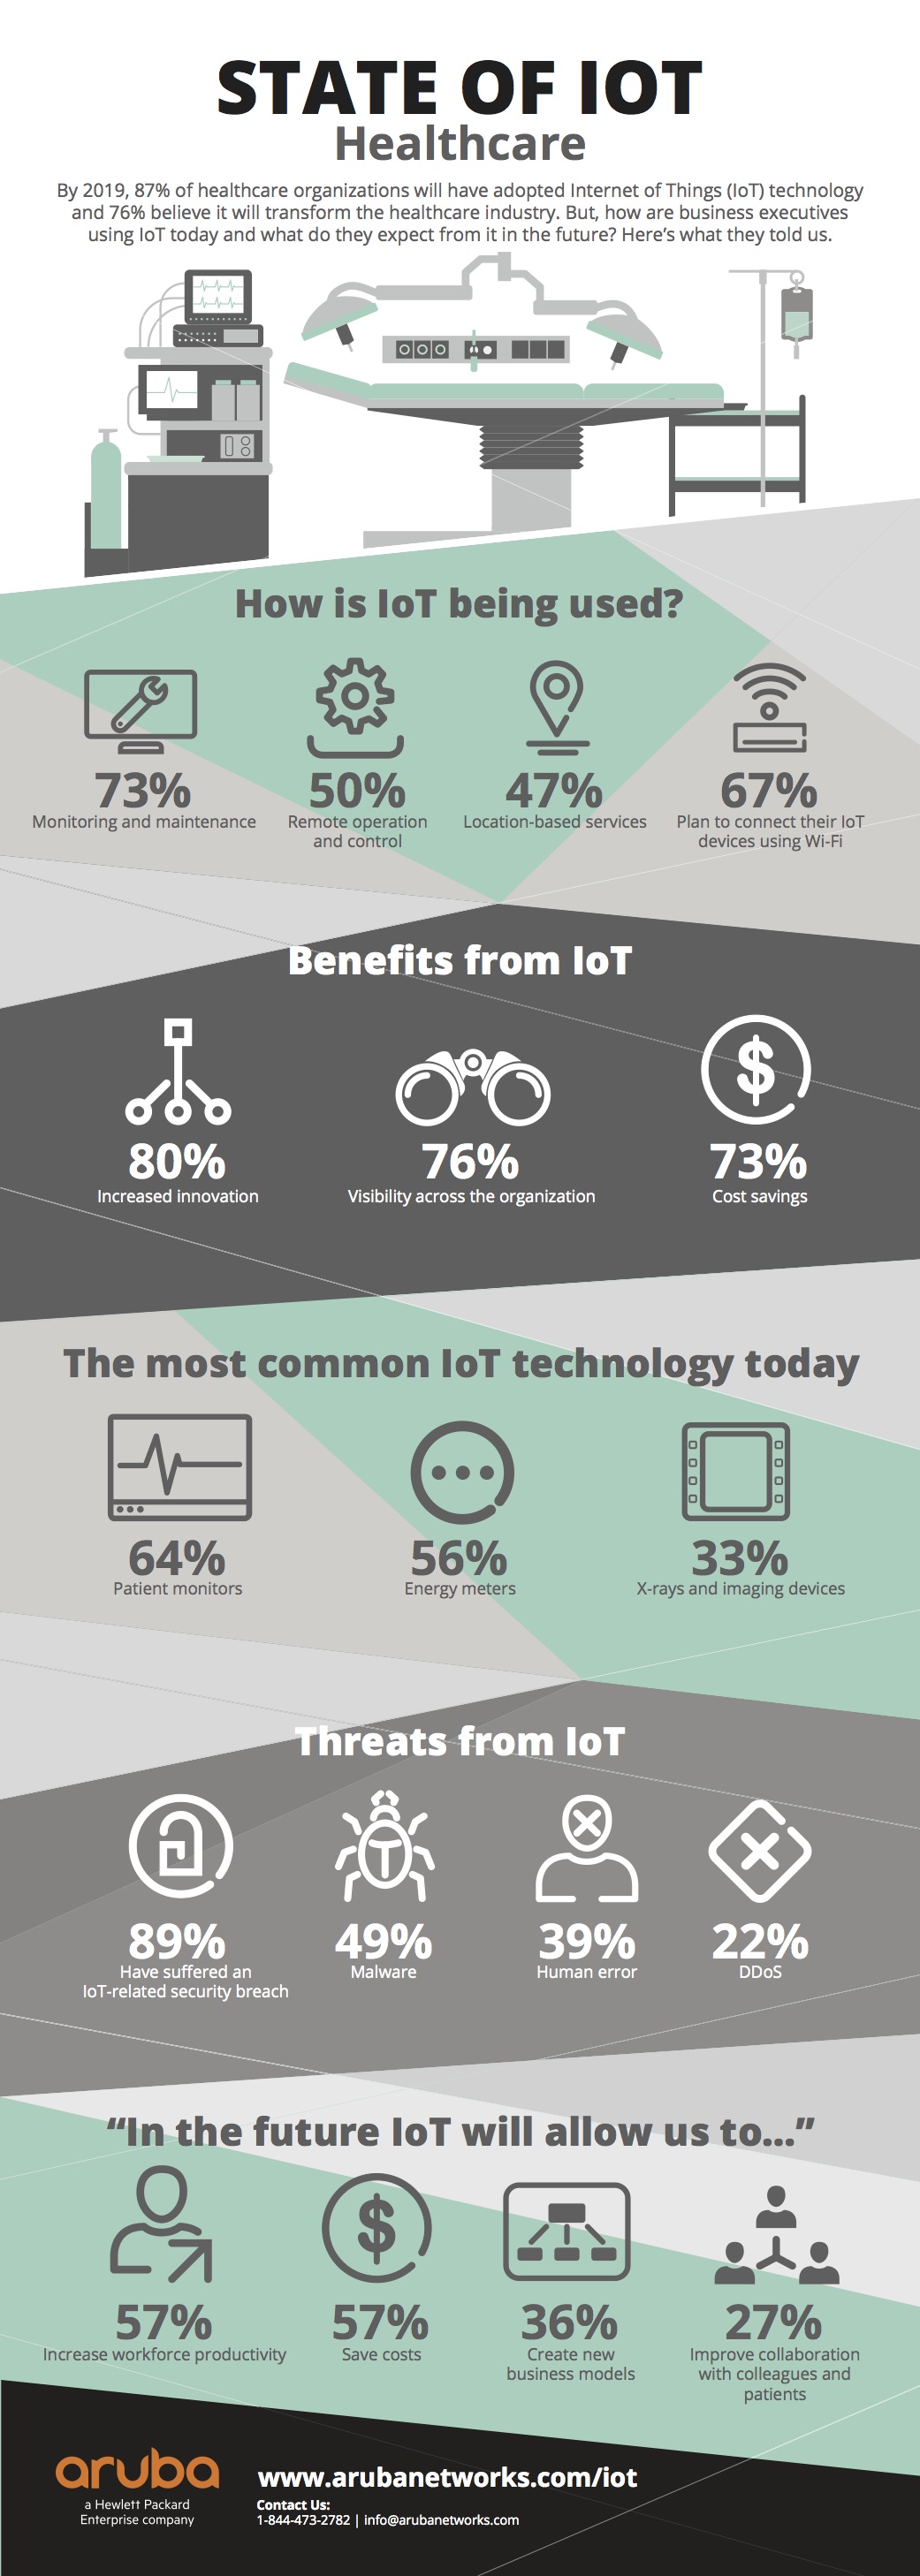 The State of IoT in healthcare